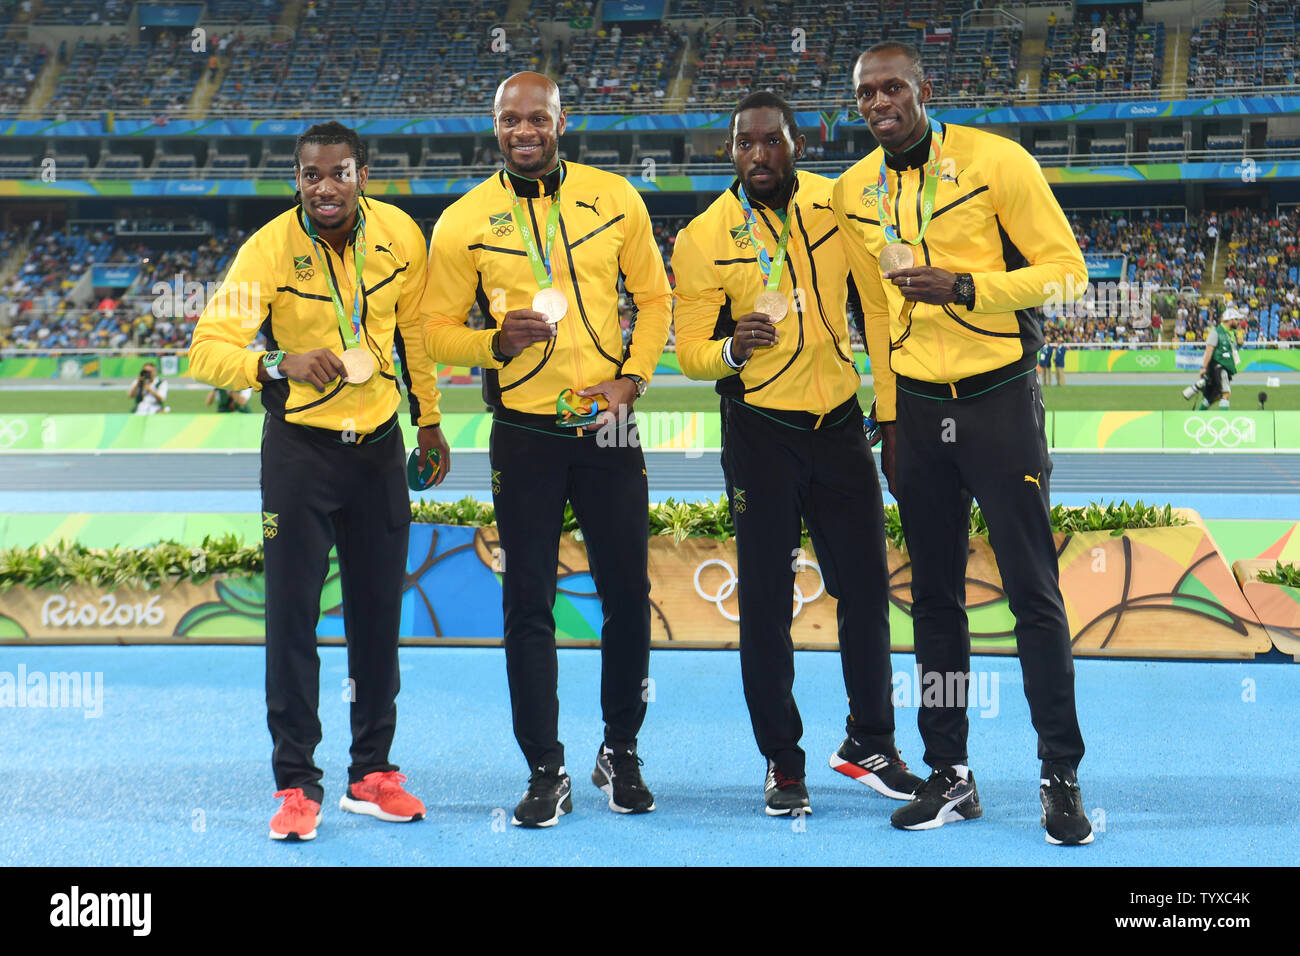 The Jamaica men's 4x100m relay team poses with their gold medals during the award ceremony at the 2016 Rio Summer Olympics in Rio de Janeiro, Brazil, on August 20, 2016. (L-R)   Photo by Richard Ellis/UPI Stock Photo